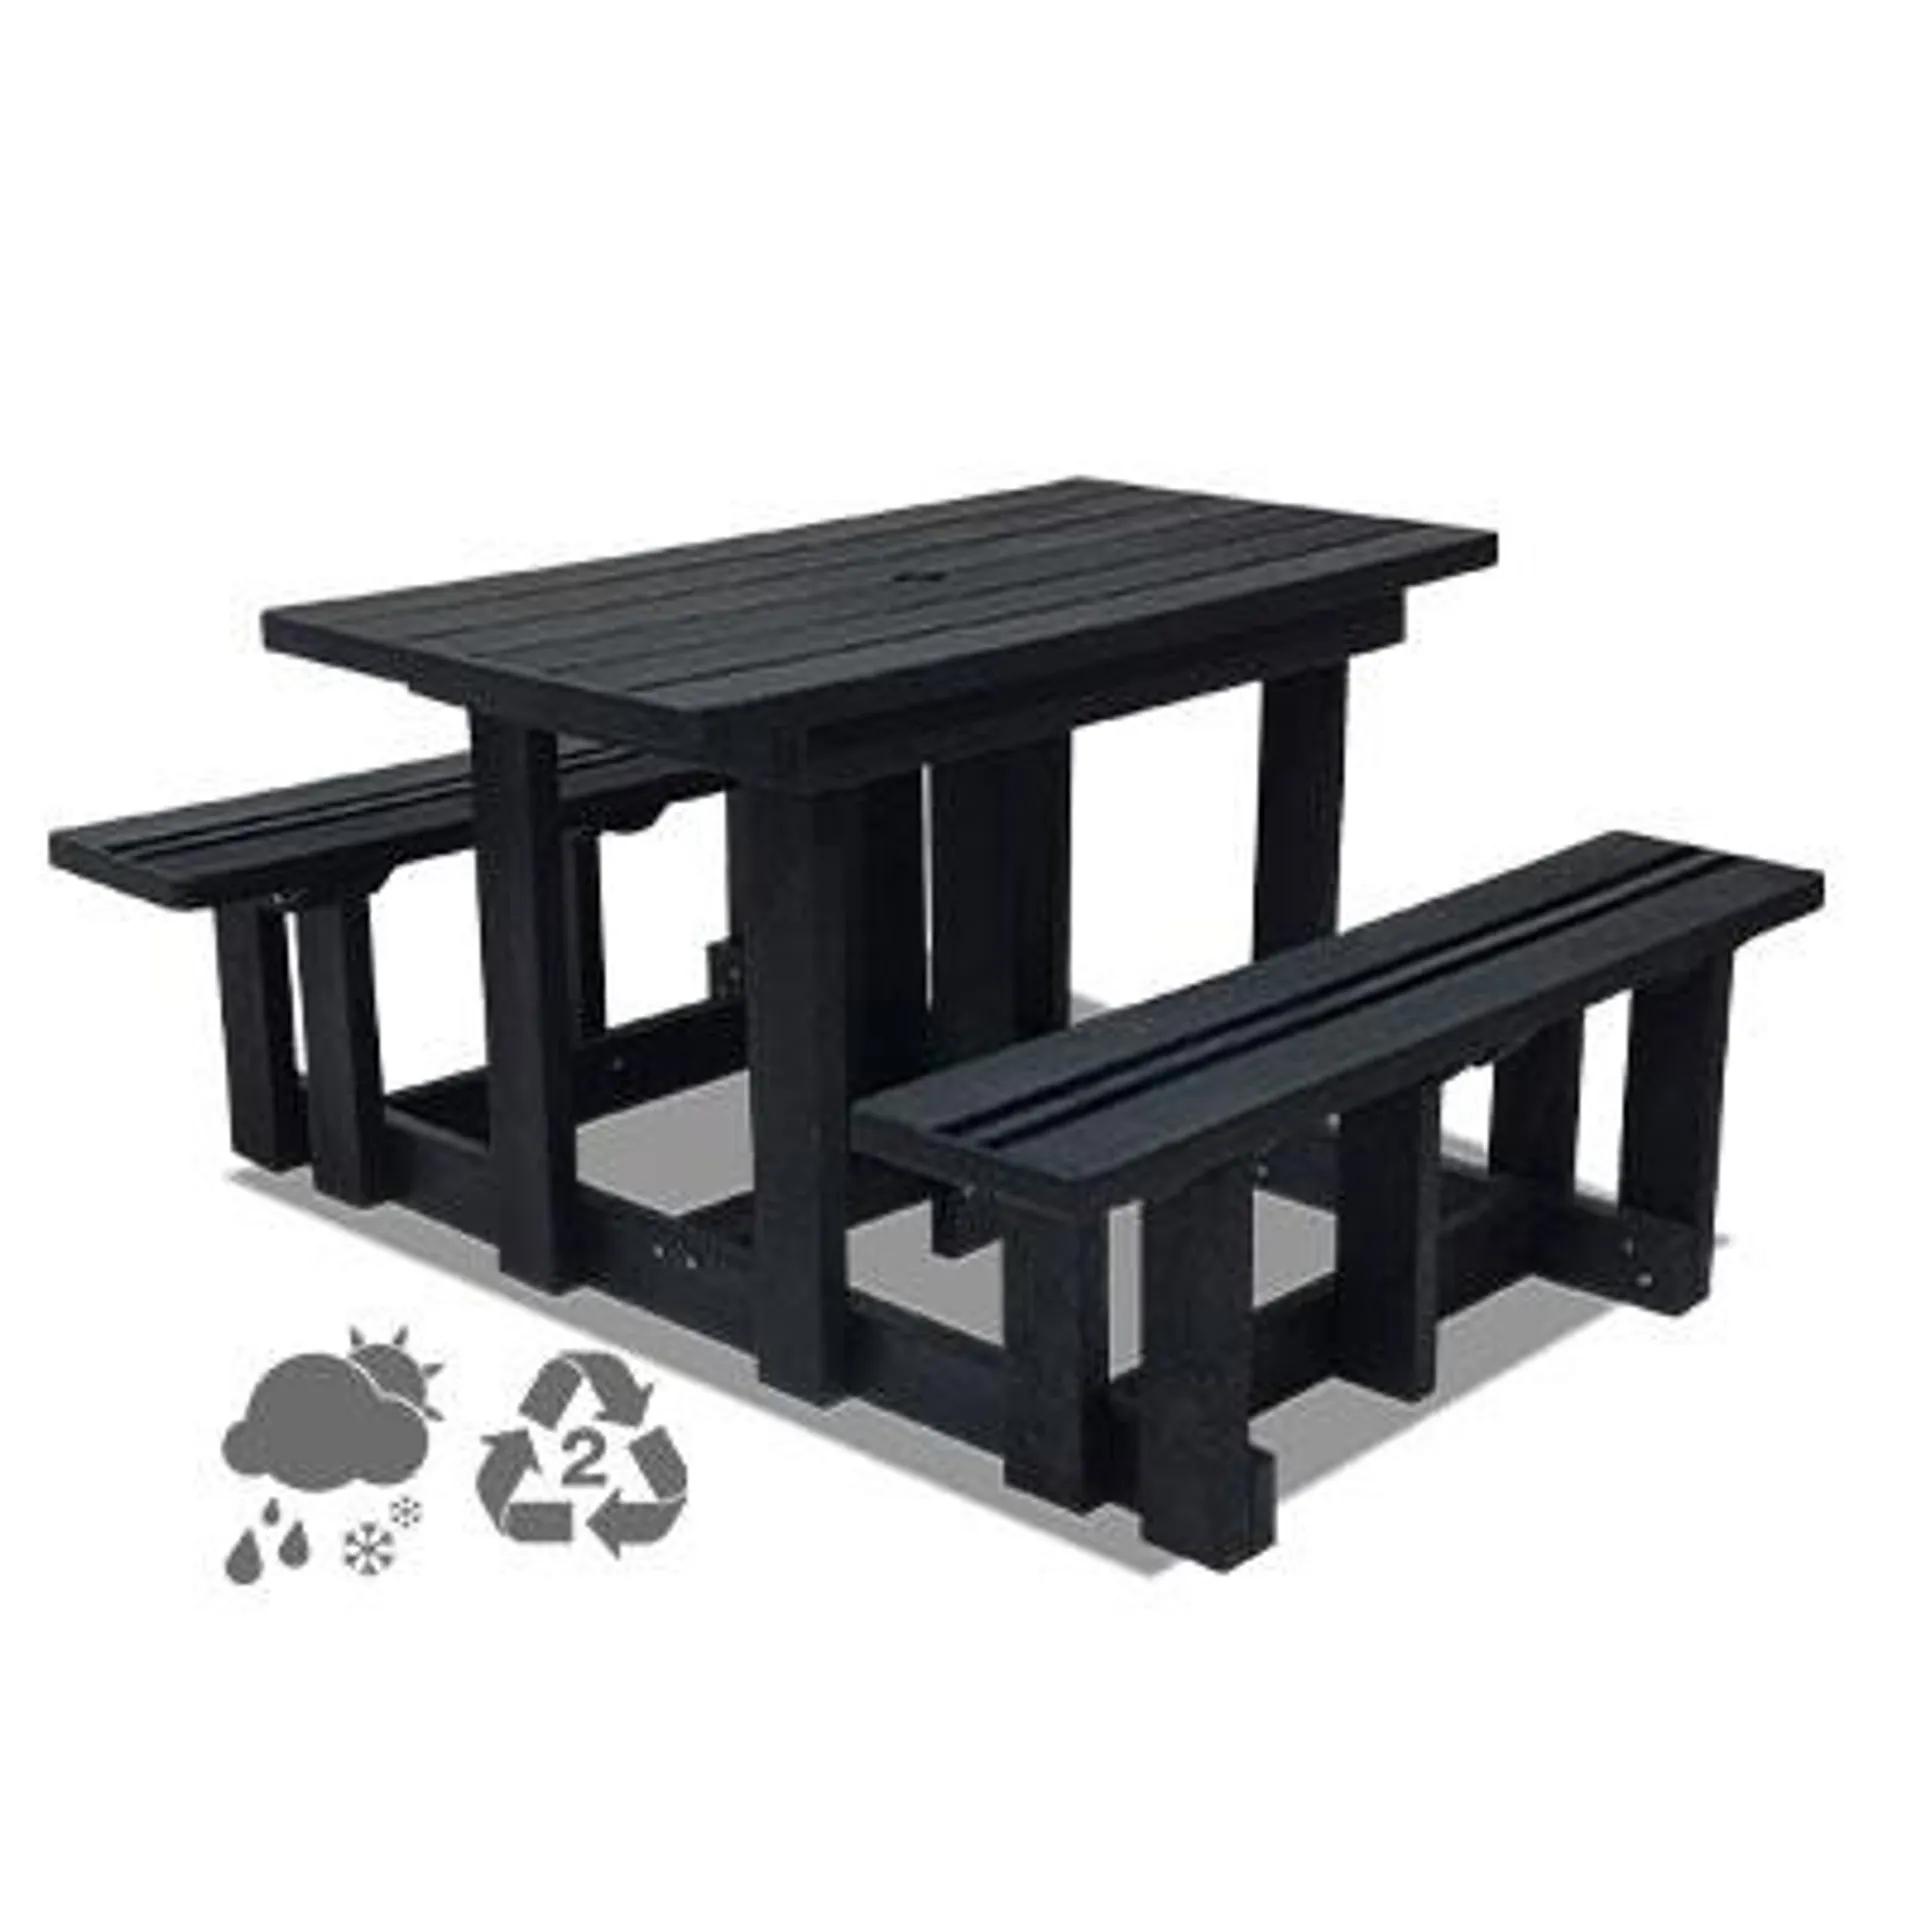 Picnic Table & Bench 4 seater